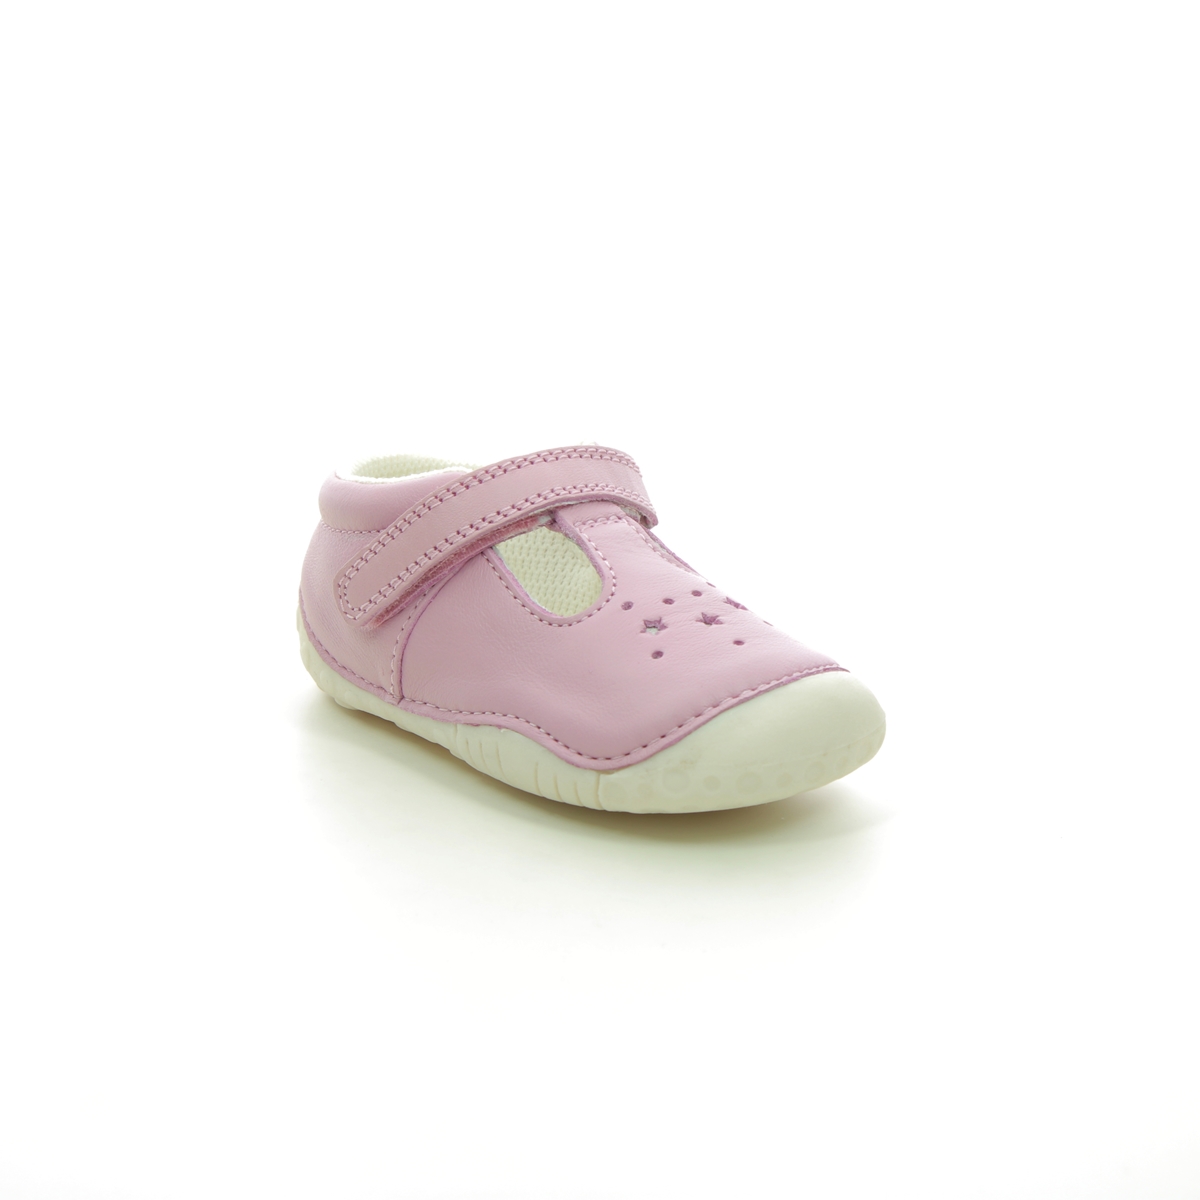 Start Rite - Tumble T Bar In Pink Leather 0761-67G In Size 3.5 In Plain Pink Leather First And Baby Shoes  In Pink Leather For kids